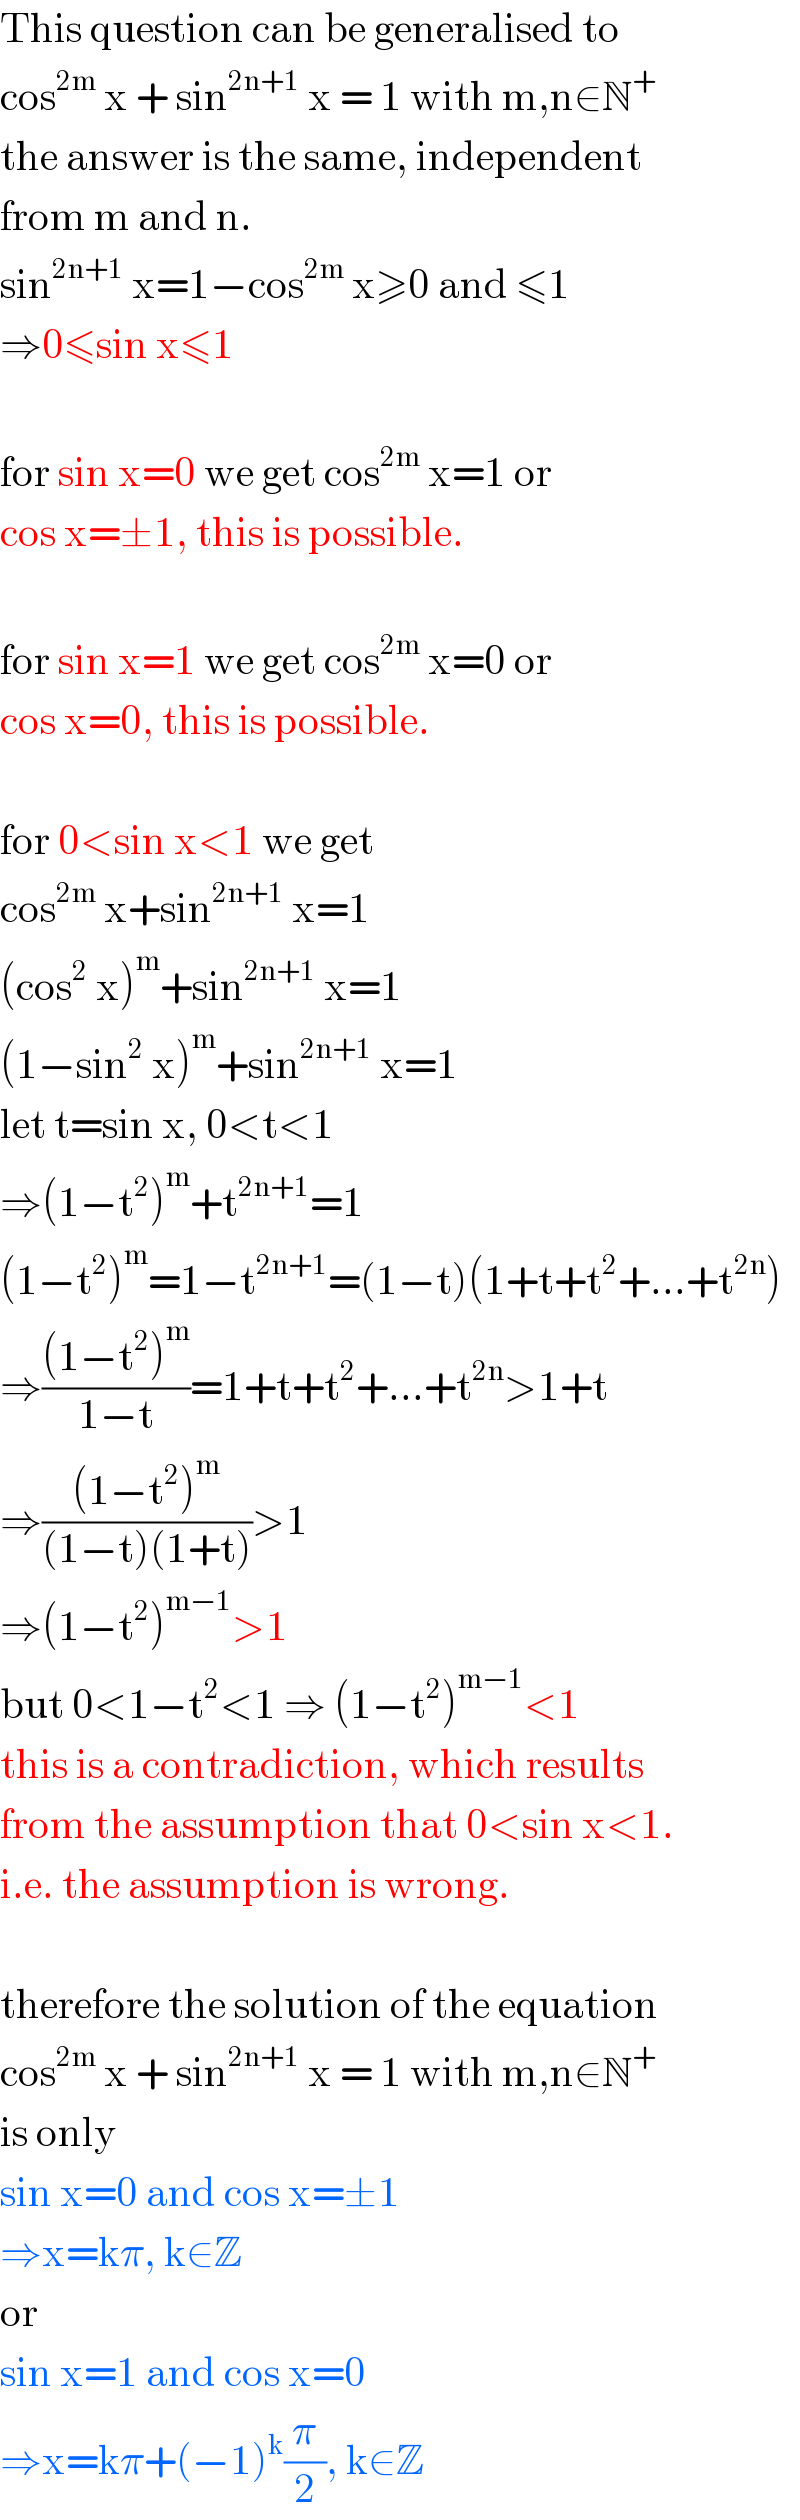 This question can be generalised to  cos^(2m)  x + sin^(2n+1)  x = 1 with m,n∈N^+   the answer is the same, independent  from m and n.  sin^(2n+1)  x=1−cos^(2m)  x≥0 and ≤1  ⇒0≤sin x≤1    for sin x=0 we get cos^(2m)  x=1 or  cos x=±1, this is possible.    for sin x=1 we get cos^(2m)  x=0 or  cos x=0, this is possible.    for 0<sin x<1 we get  cos^(2m)  x+sin^(2n+1)  x=1  (cos^2  x)^m +sin^(2n+1)  x=1  (1−sin^2  x)^m +sin^(2n+1)  x=1  let t=sin x, 0<t<1  ⇒(1−t^2 )^m +t^(2n+1) =1  (1−t^2 )^m =1−t^(2n+1) =(1−t)(1+t+t^2 +...+t^(2n) )  ⇒(((1−t^2 )^m )/(1−t))=1+t+t^2 +...+t^(2n) >1+t  ⇒(((1−t^2 )^m )/((1−t)(1+t)))>1  ⇒(1−t^2 )^(m−1) >1  but 0<1−t^2 <1 ⇒ (1−t^2 )^(m−1) <1  this is a contradiction, which results  from the assumption that 0<sin x<1.  i.e. the assumption is wrong.    therefore the solution of the equation  cos^(2m)  x + sin^(2n+1)  x = 1 with m,n∈N^+   is only  sin x=0 and cos x=±1   ⇒x=kπ, k∈Z  or  sin x=1 and cos x=0   ⇒x=kπ+(−1)^k (π/2), k∈Z  